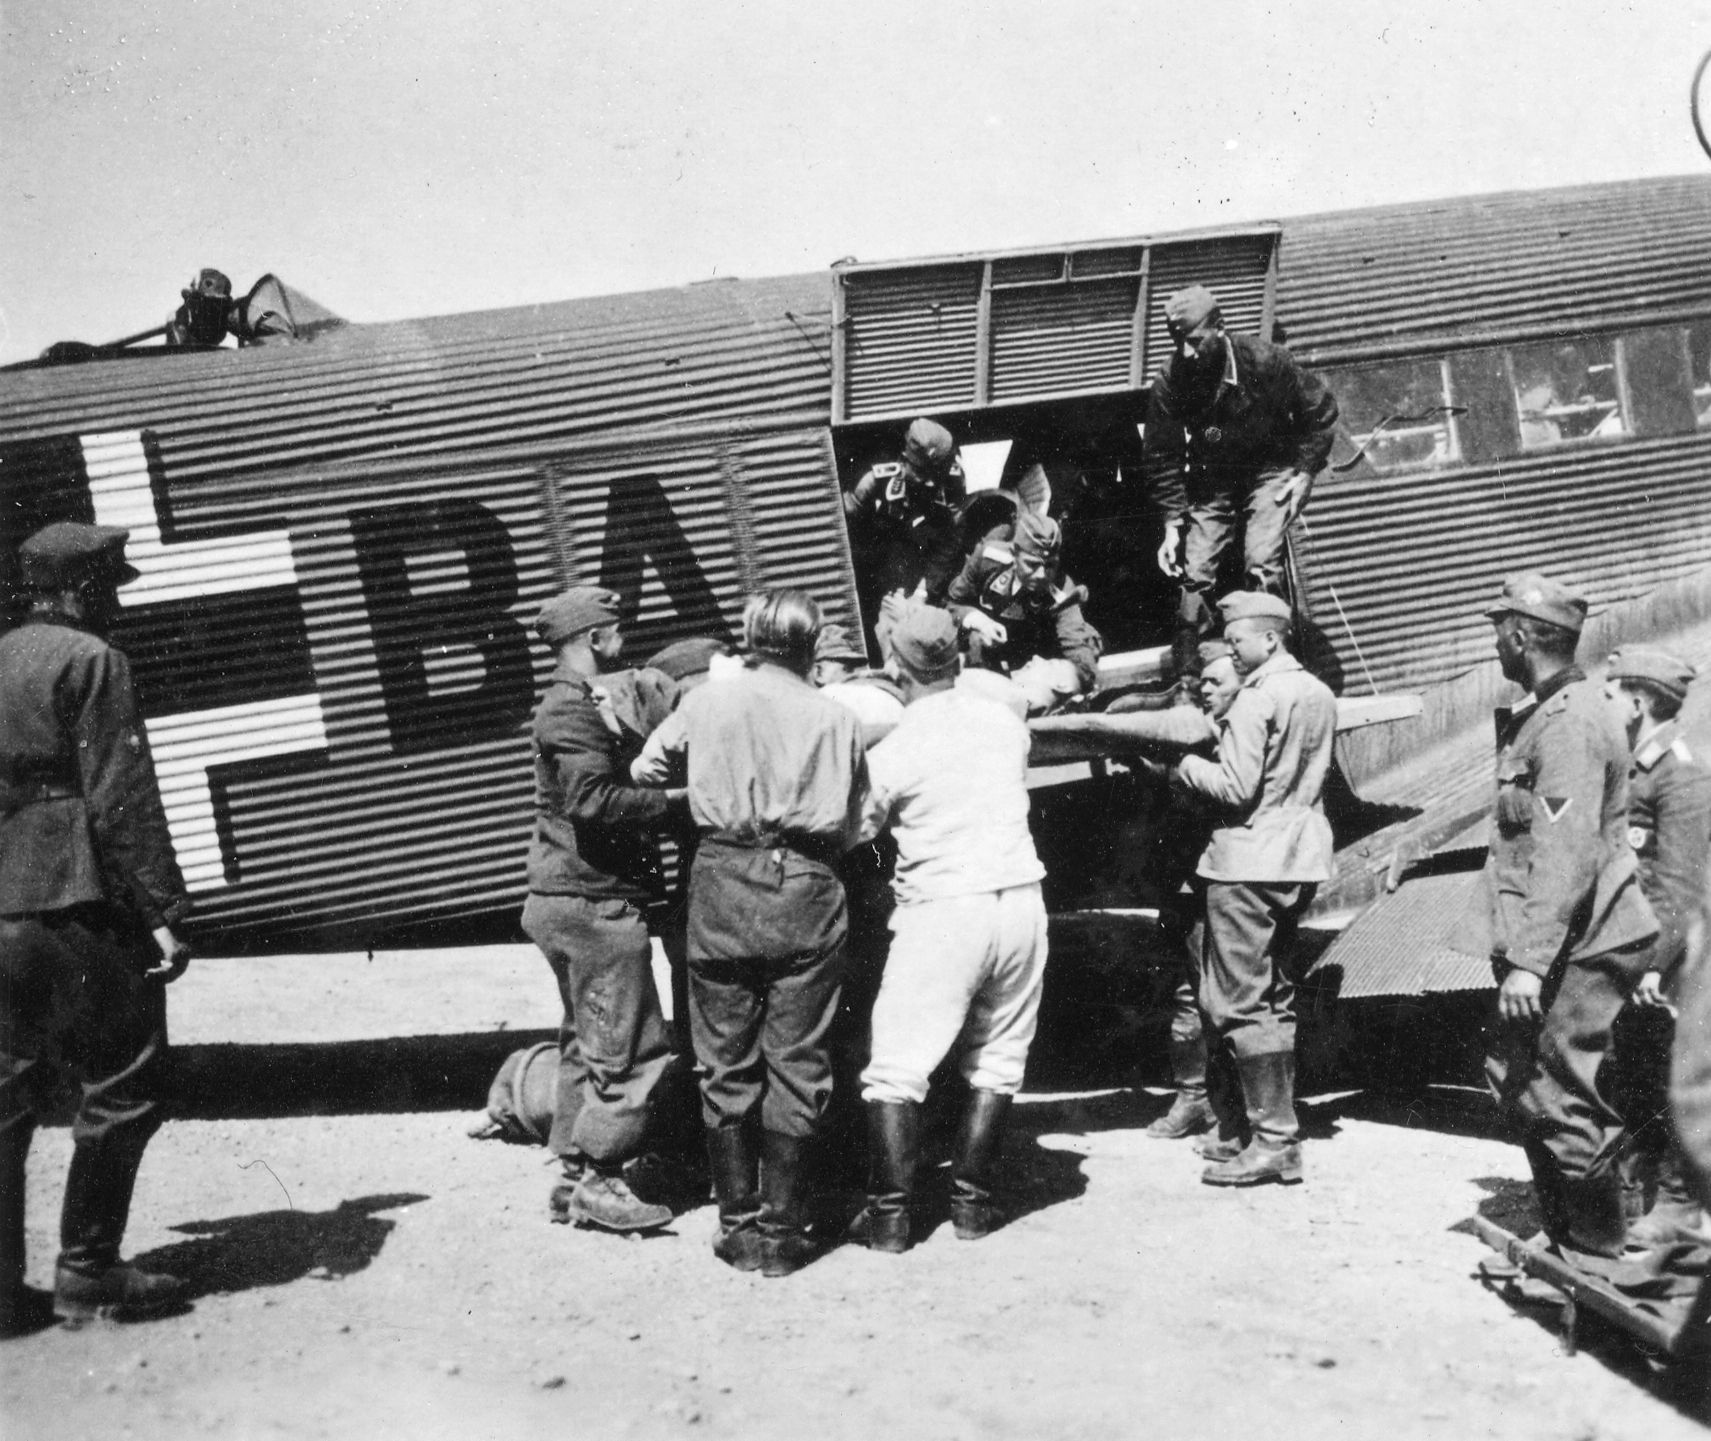 A Junkers Ju-52 returns from Crete, bringing home wounded parachutists and Alpine patrol soldiers.